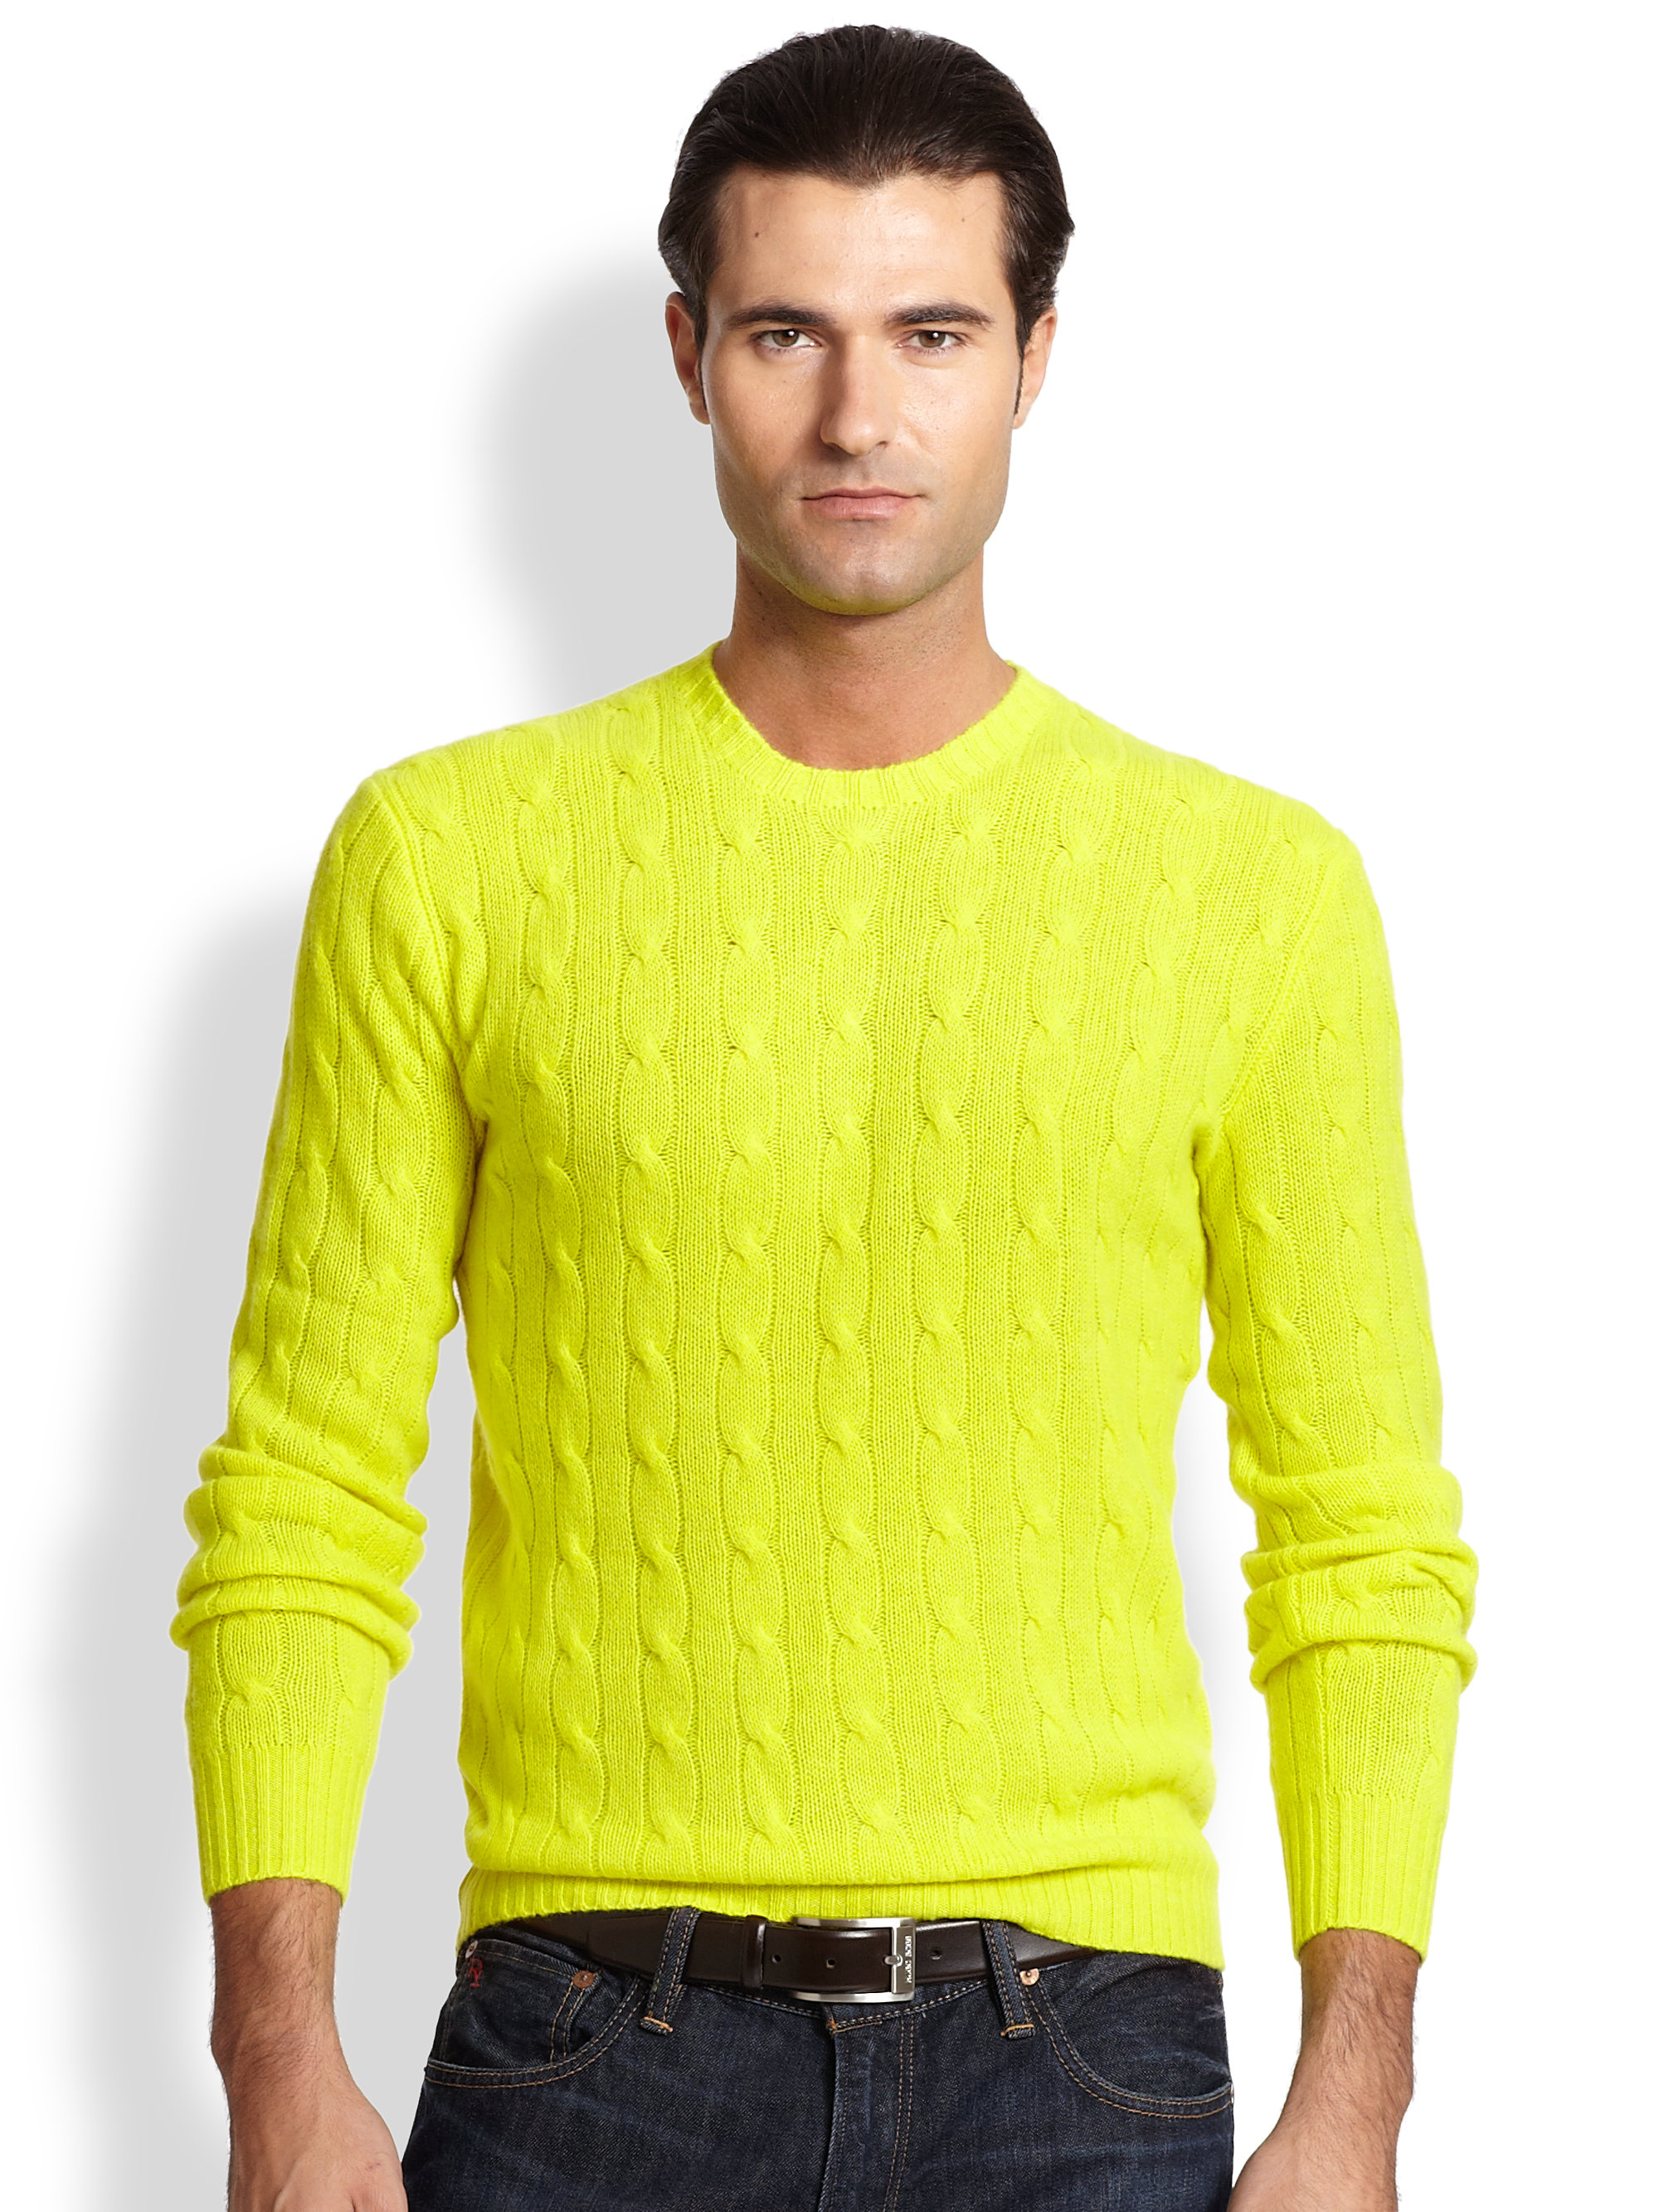 Polo Ralph Lauren Cable-knit Cashmere Sweater in Yellow for Men - Lyst